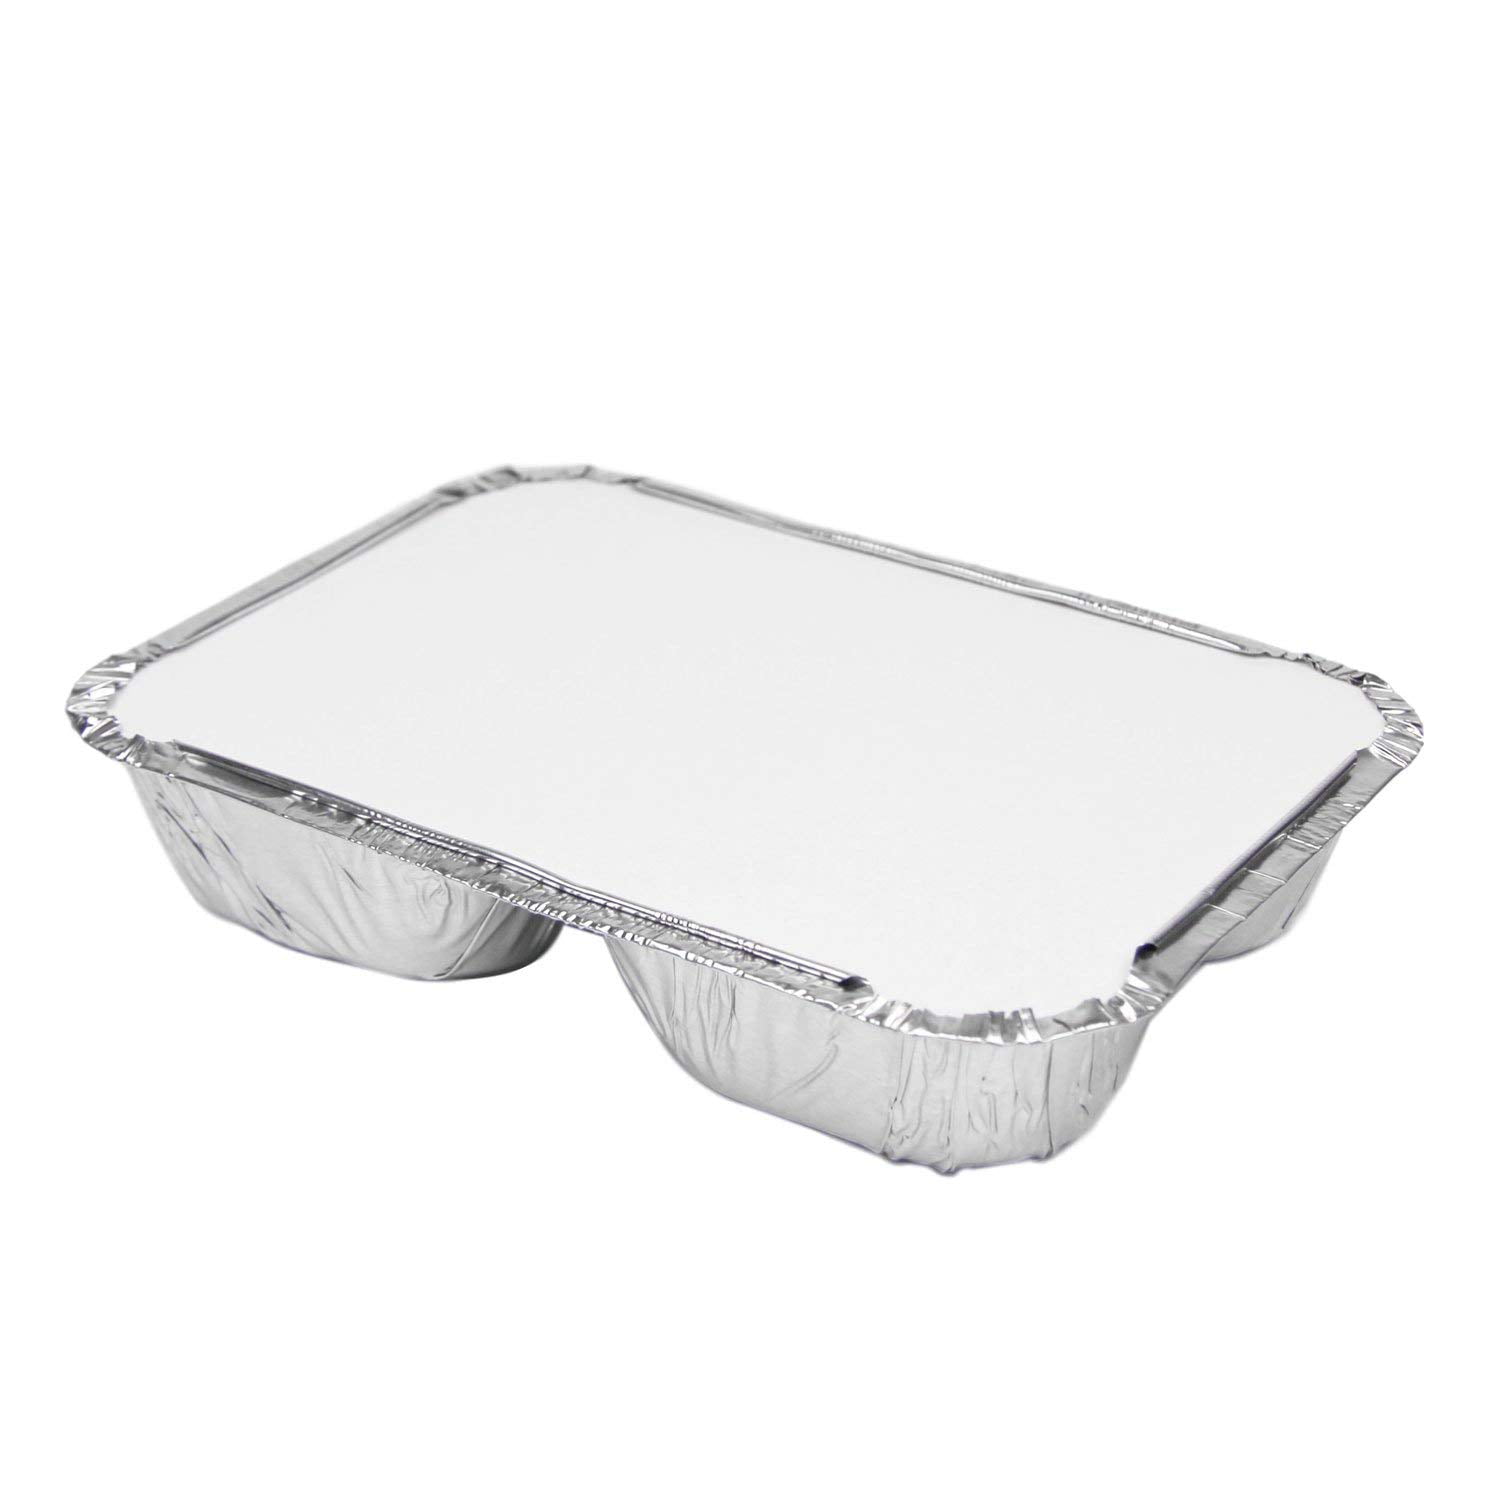 Aluminum Foil Tray 3 Compartment with lid 1ct